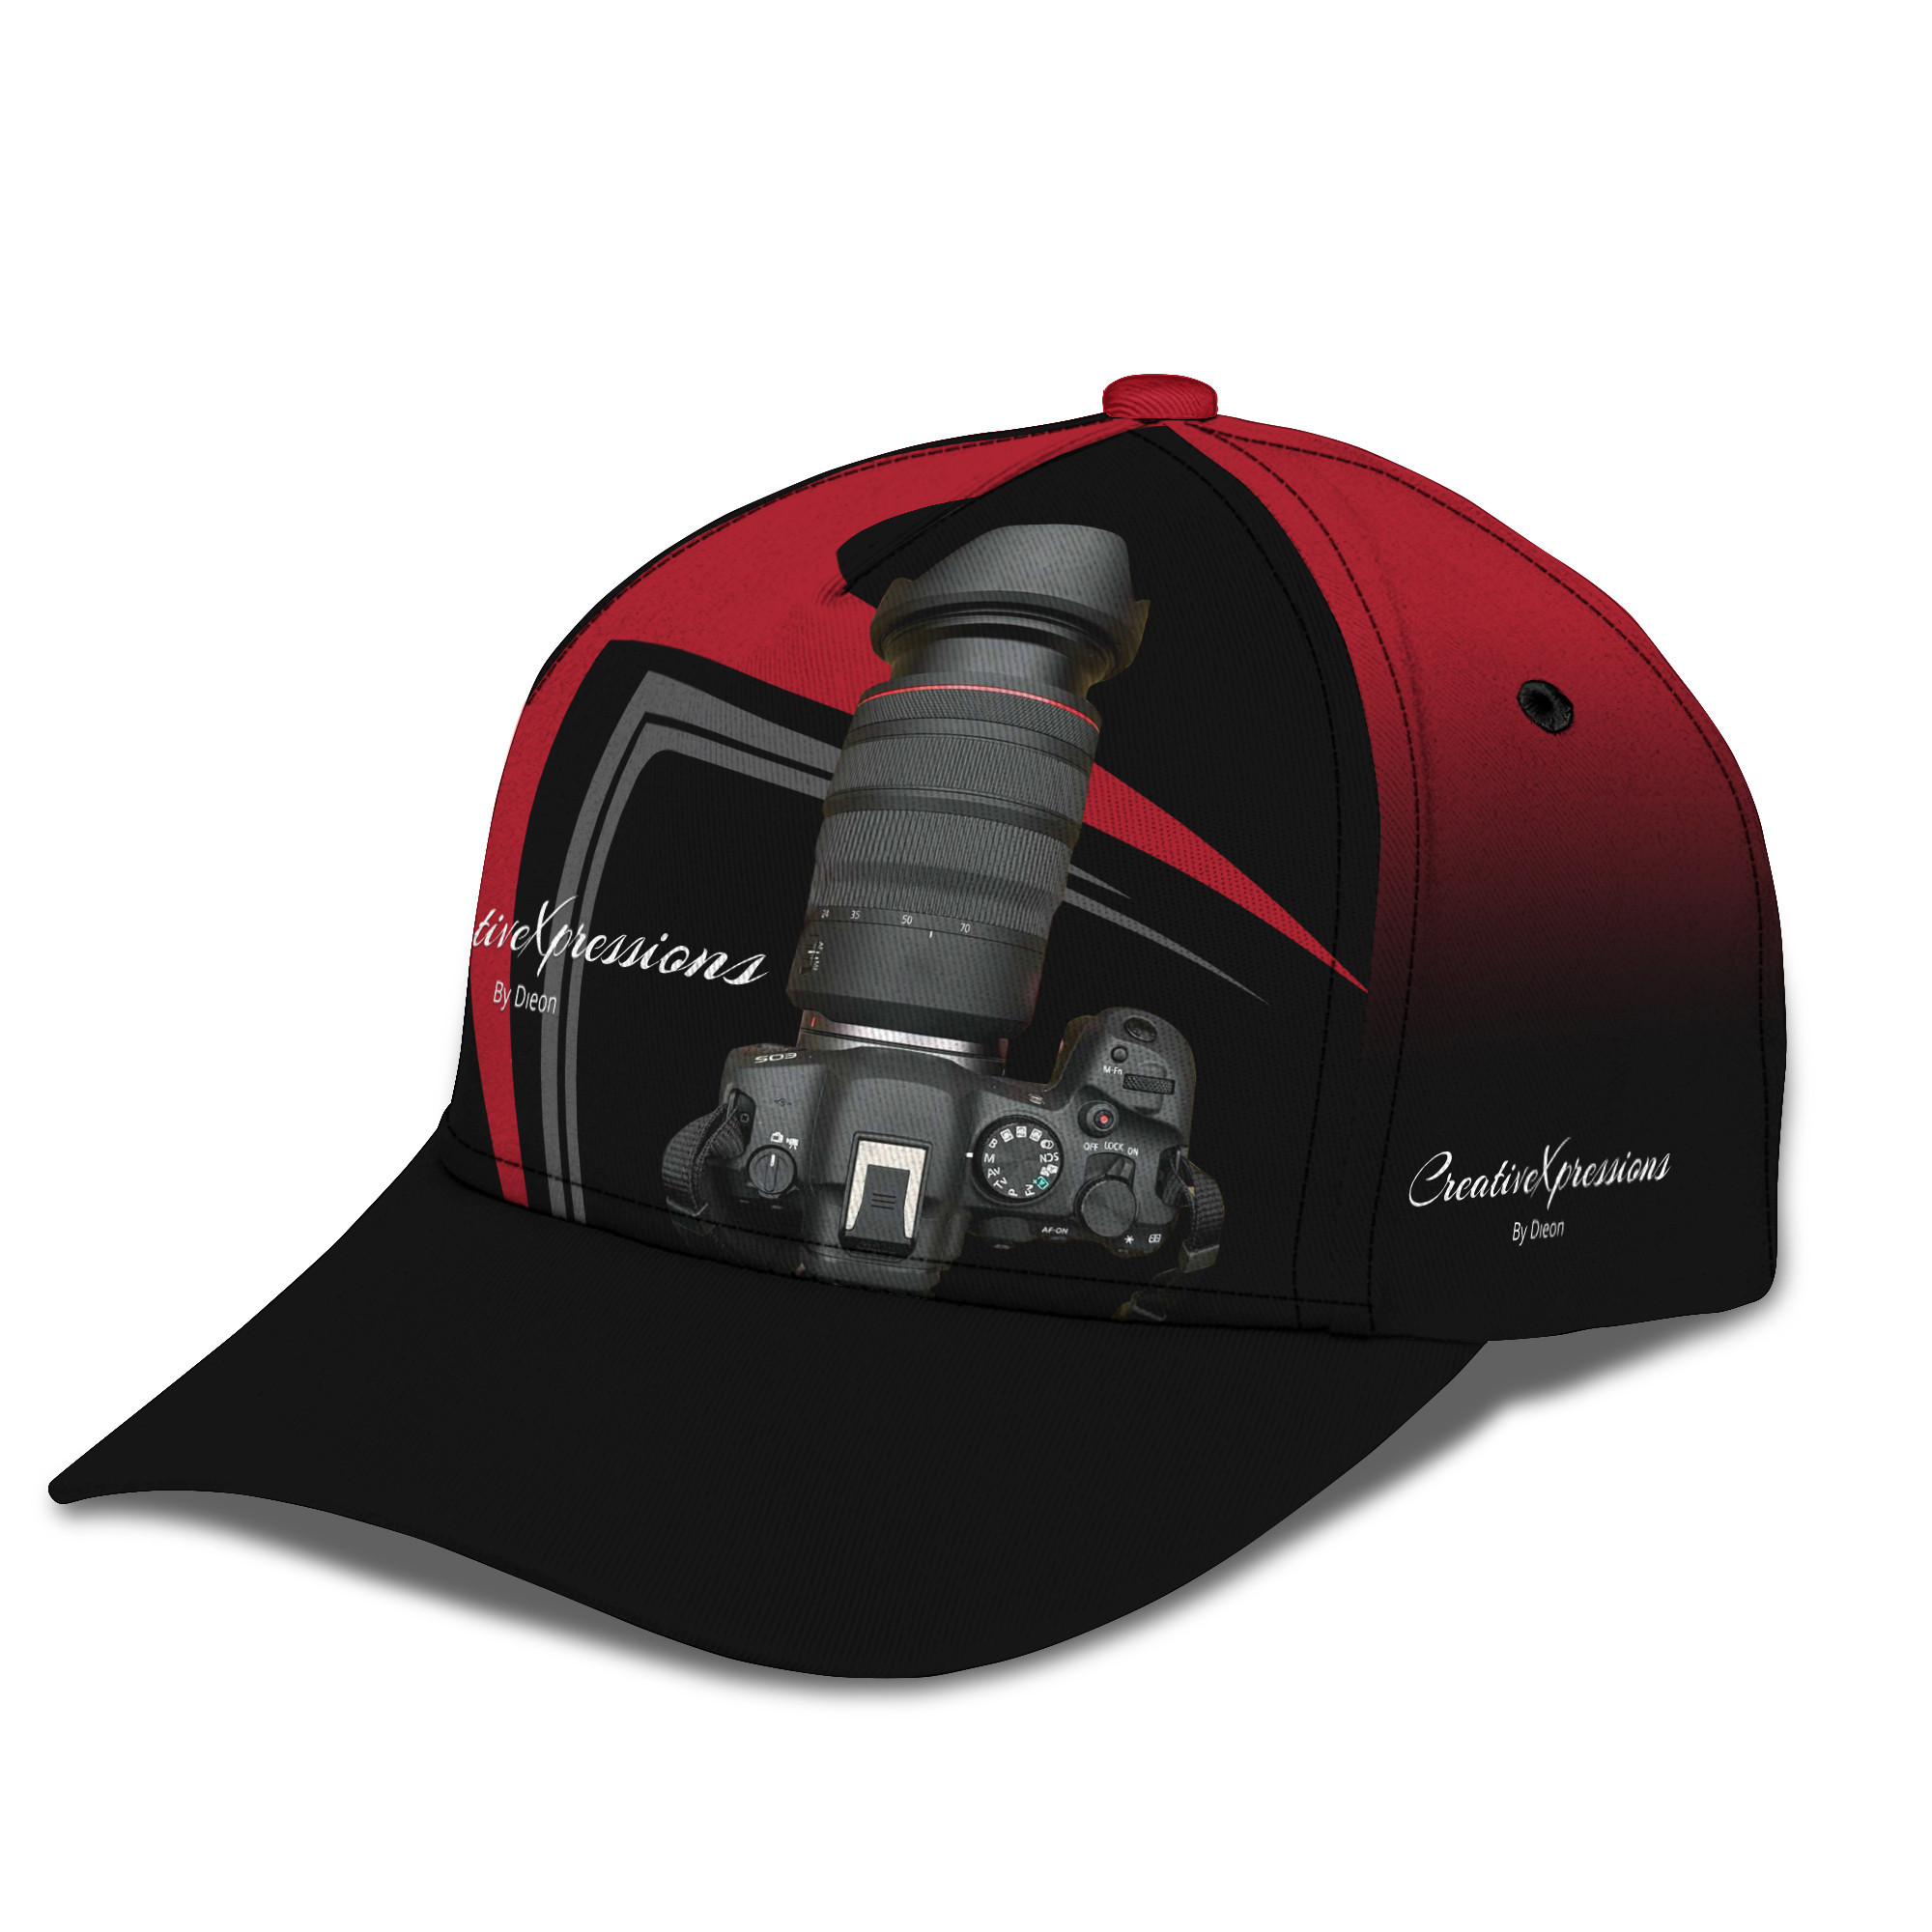 CreativeXpressions Cap Personalized Name 3D Baseball